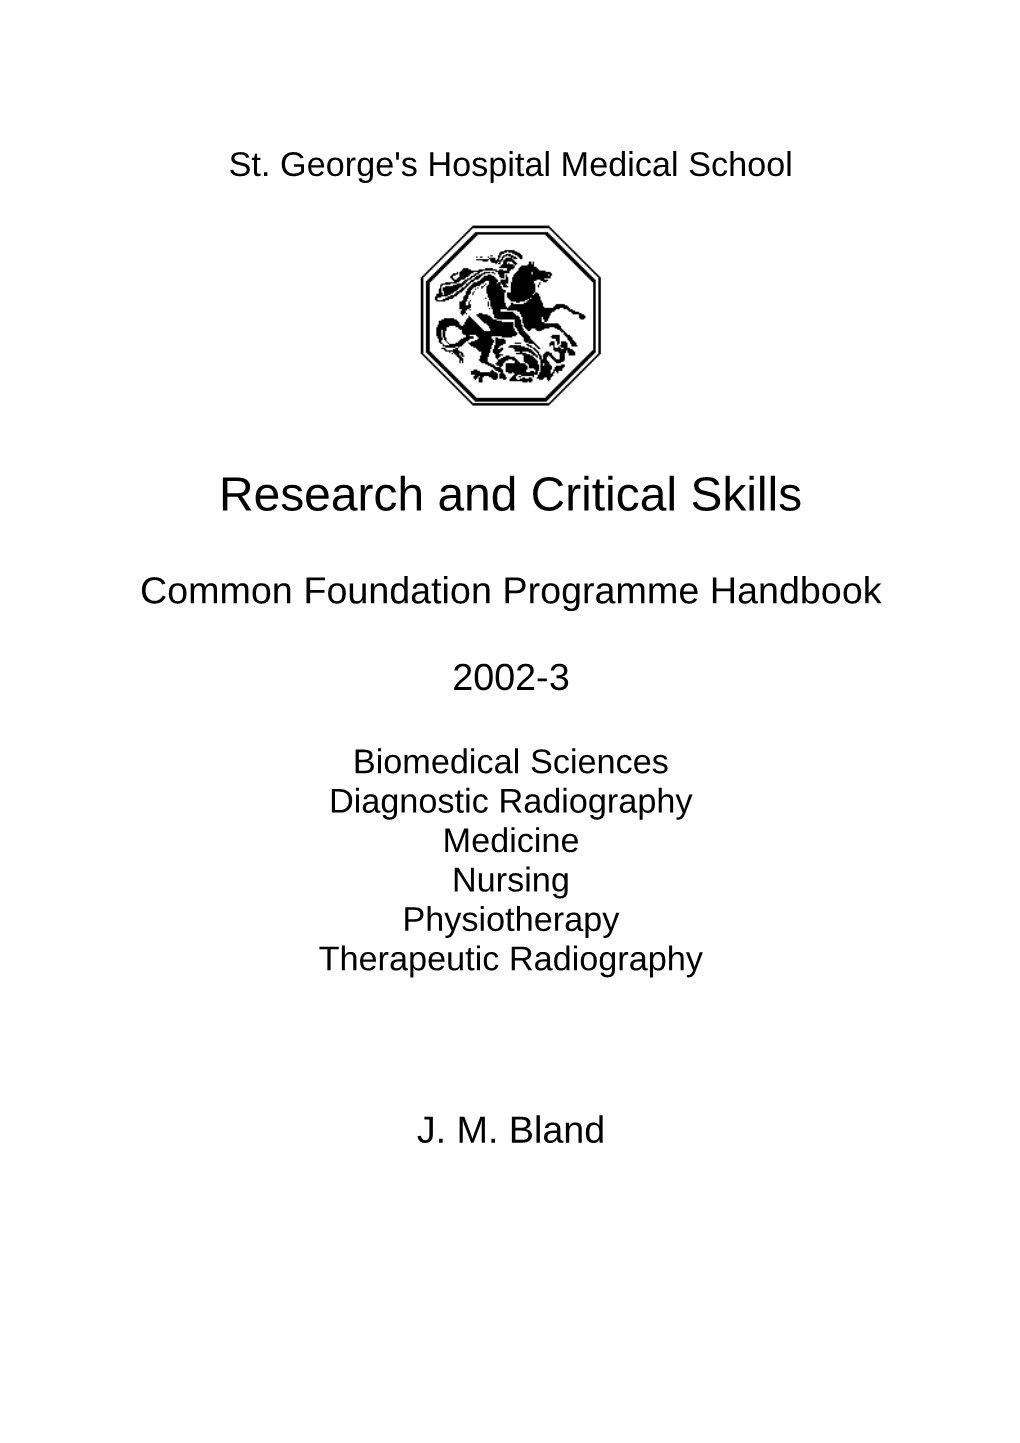 Research and Critical Skills, 1999-2000